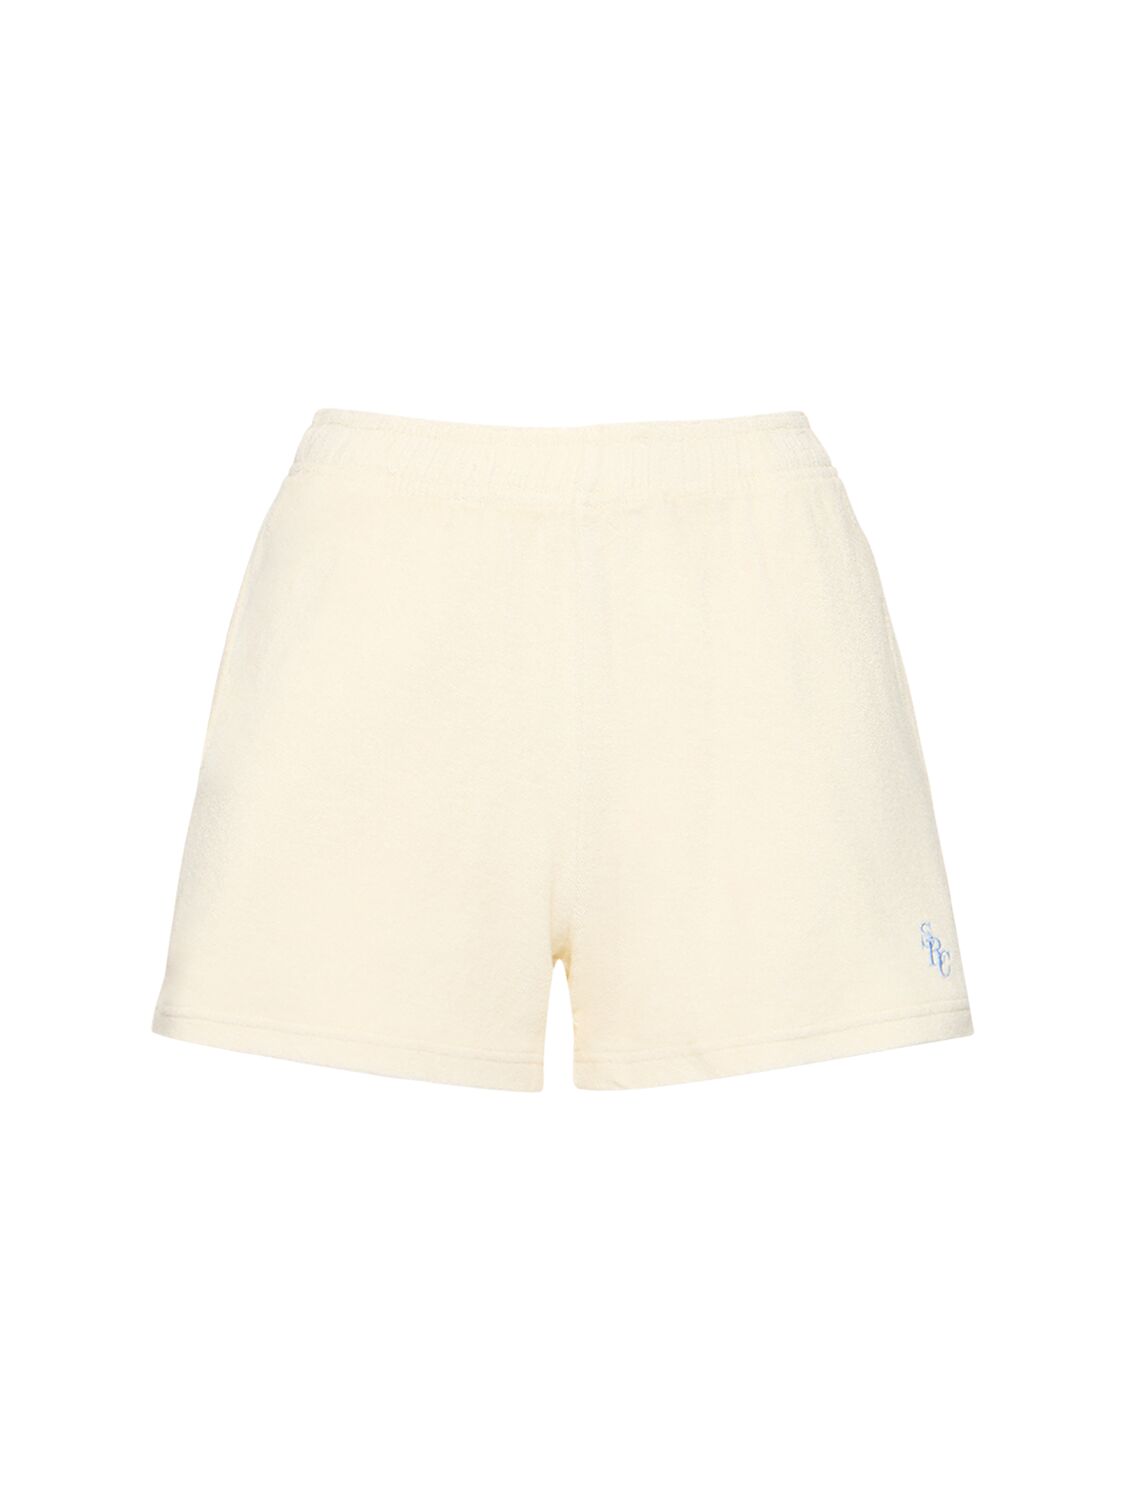 Image of Src Cotton Terry Shorts